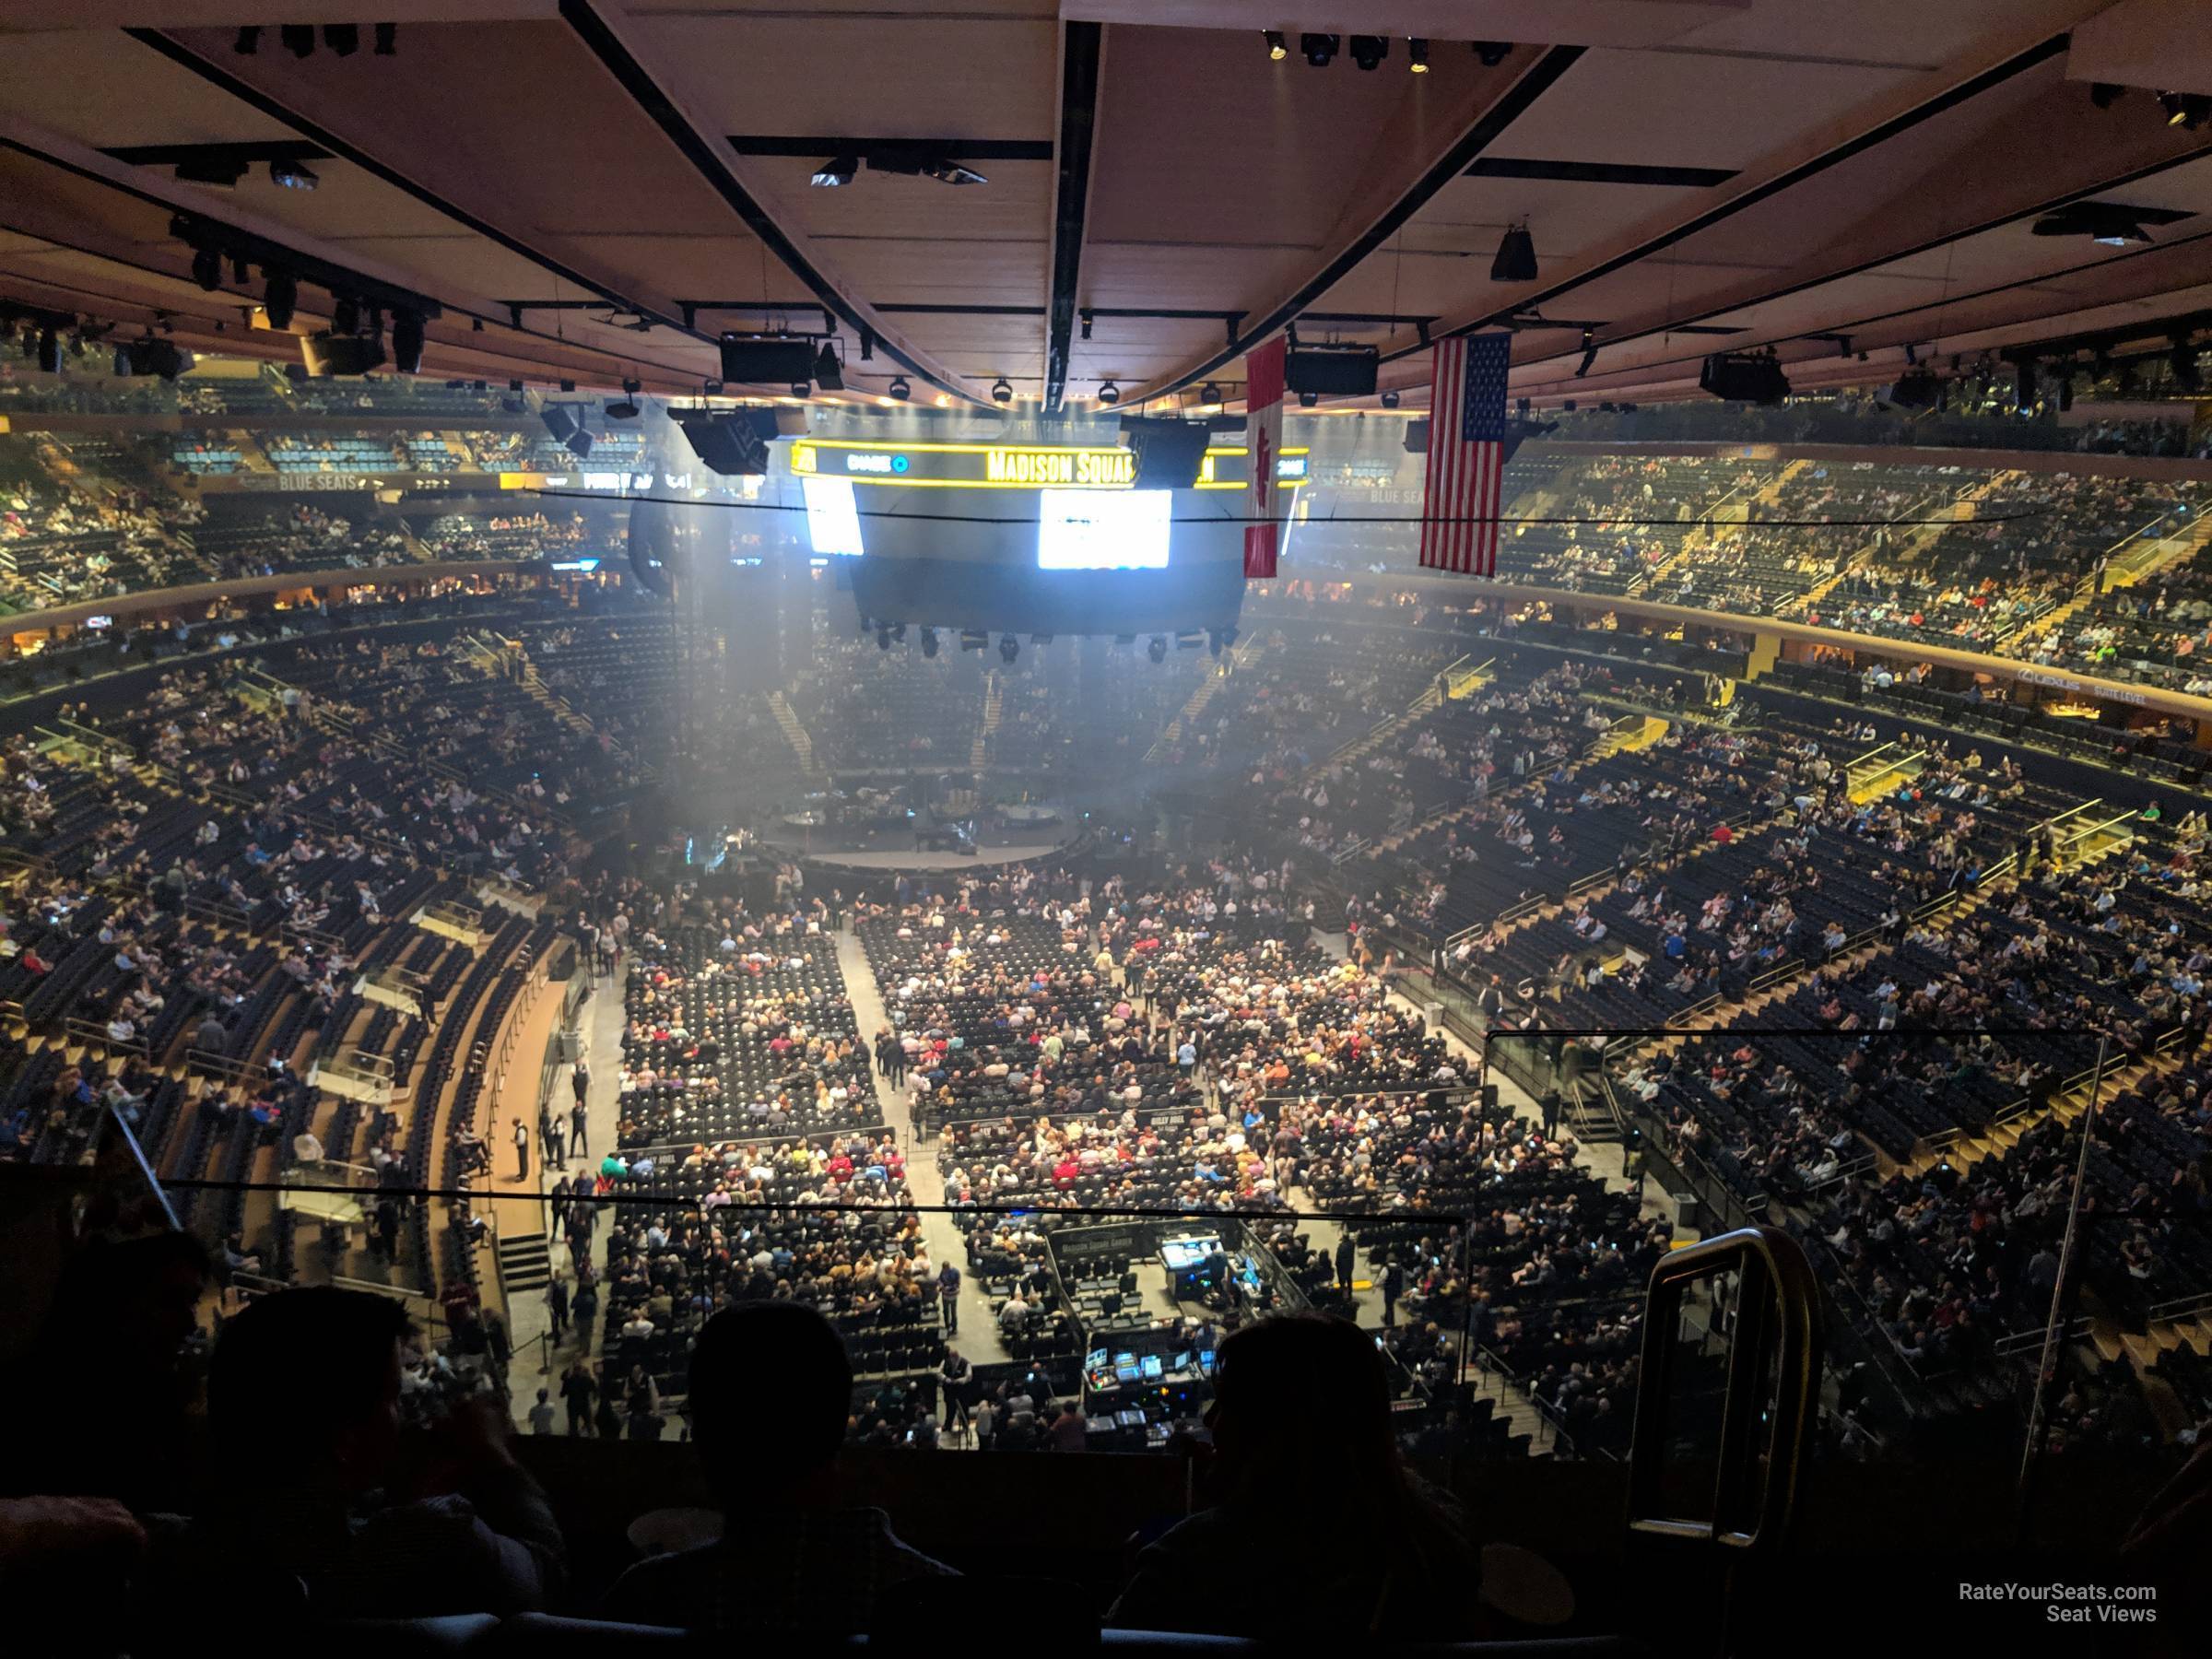 section 303, row 2 seat view  for concert - madison square garden